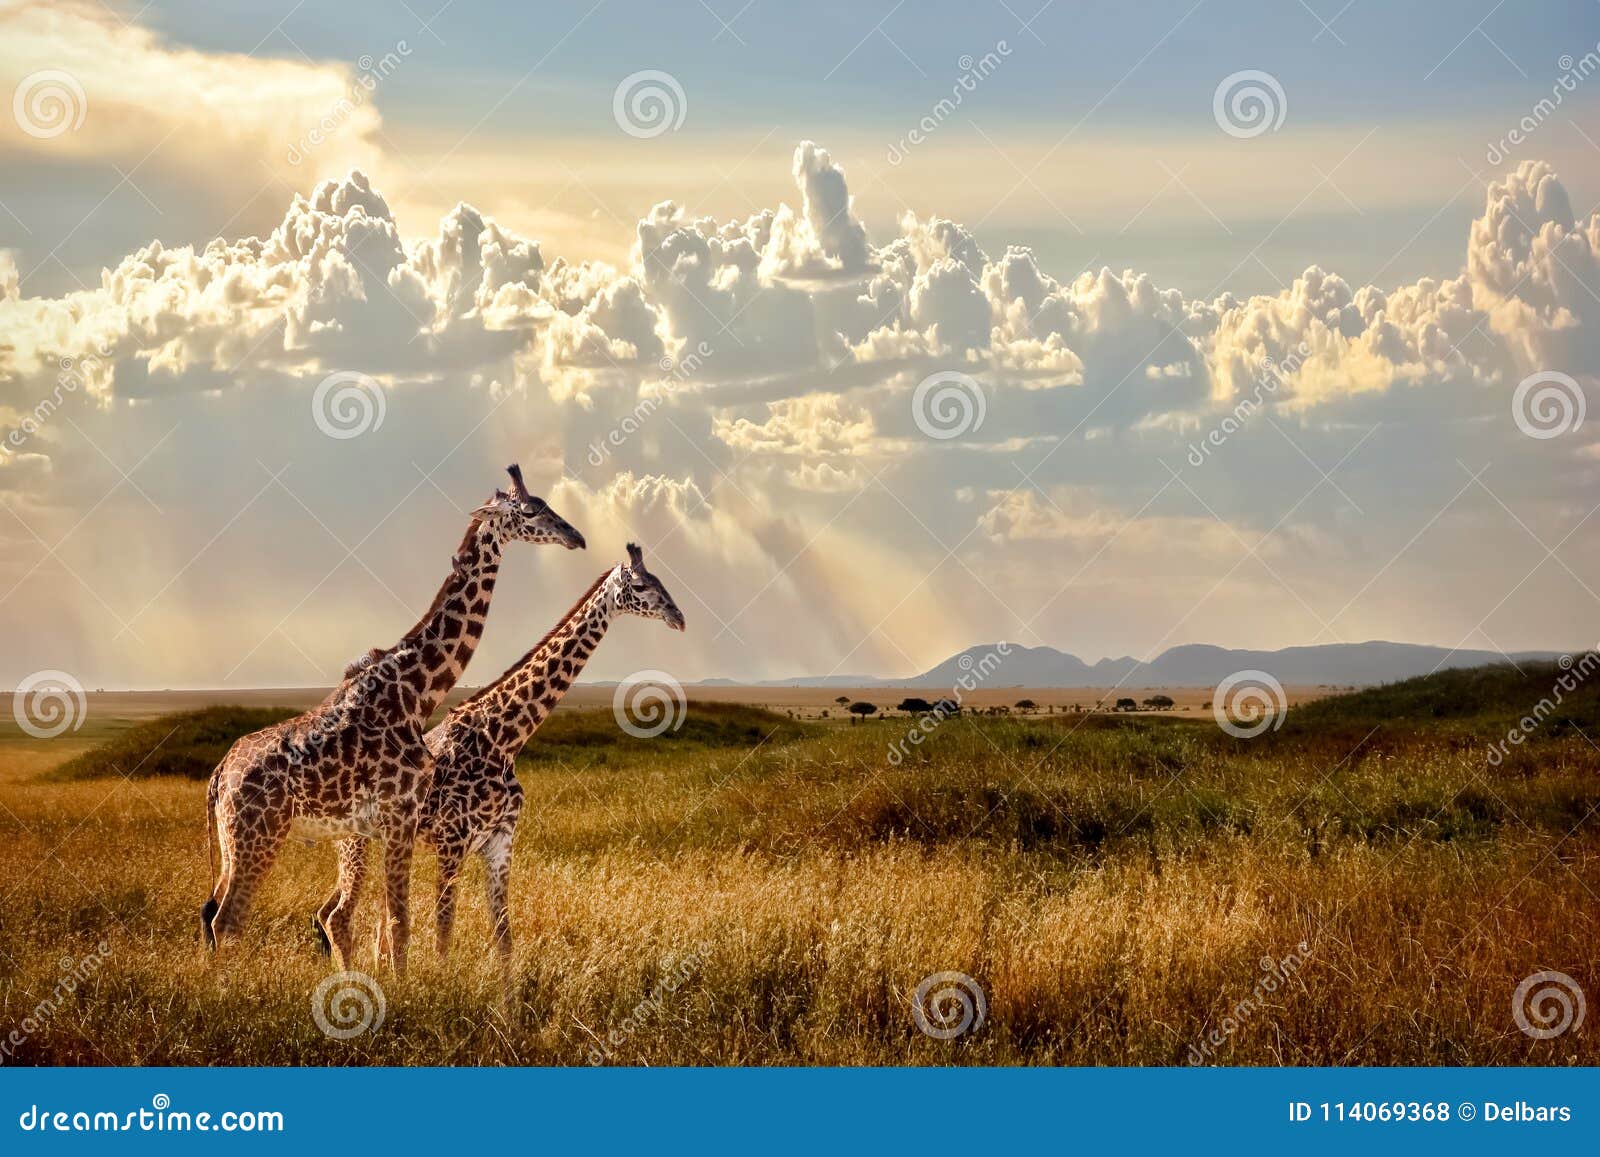 group of giraffes in the serengeti national park. sunset background. sky with rays of light in the african savannah.